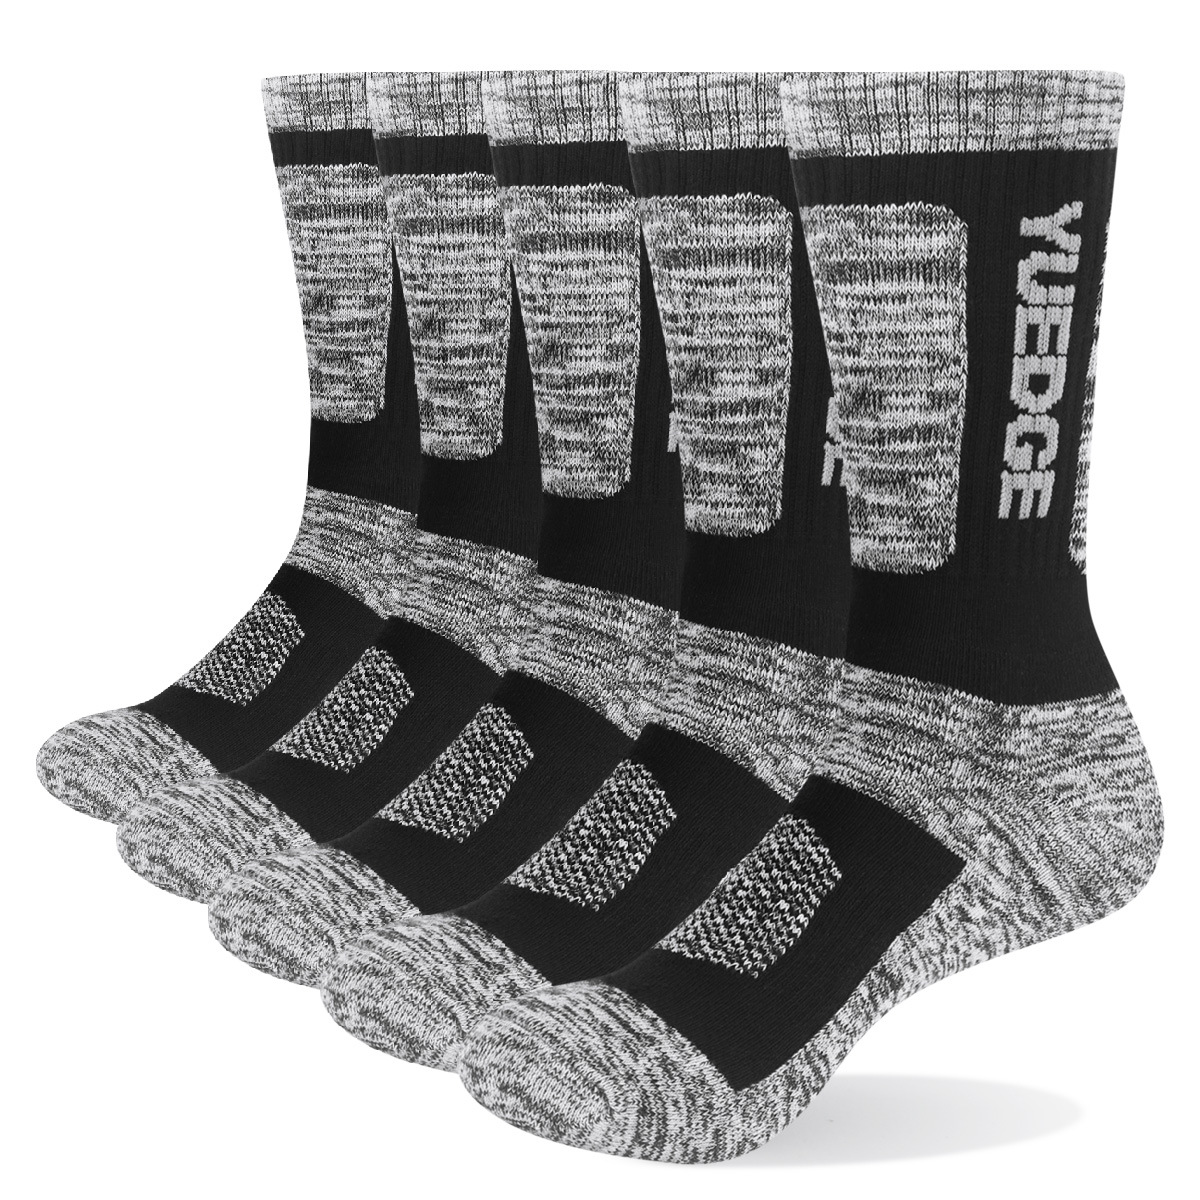 YUEDGE 10 Pairs Outdoor Sports Socks Cubic Cotton Thick Towels Walk Running Basketball Socks